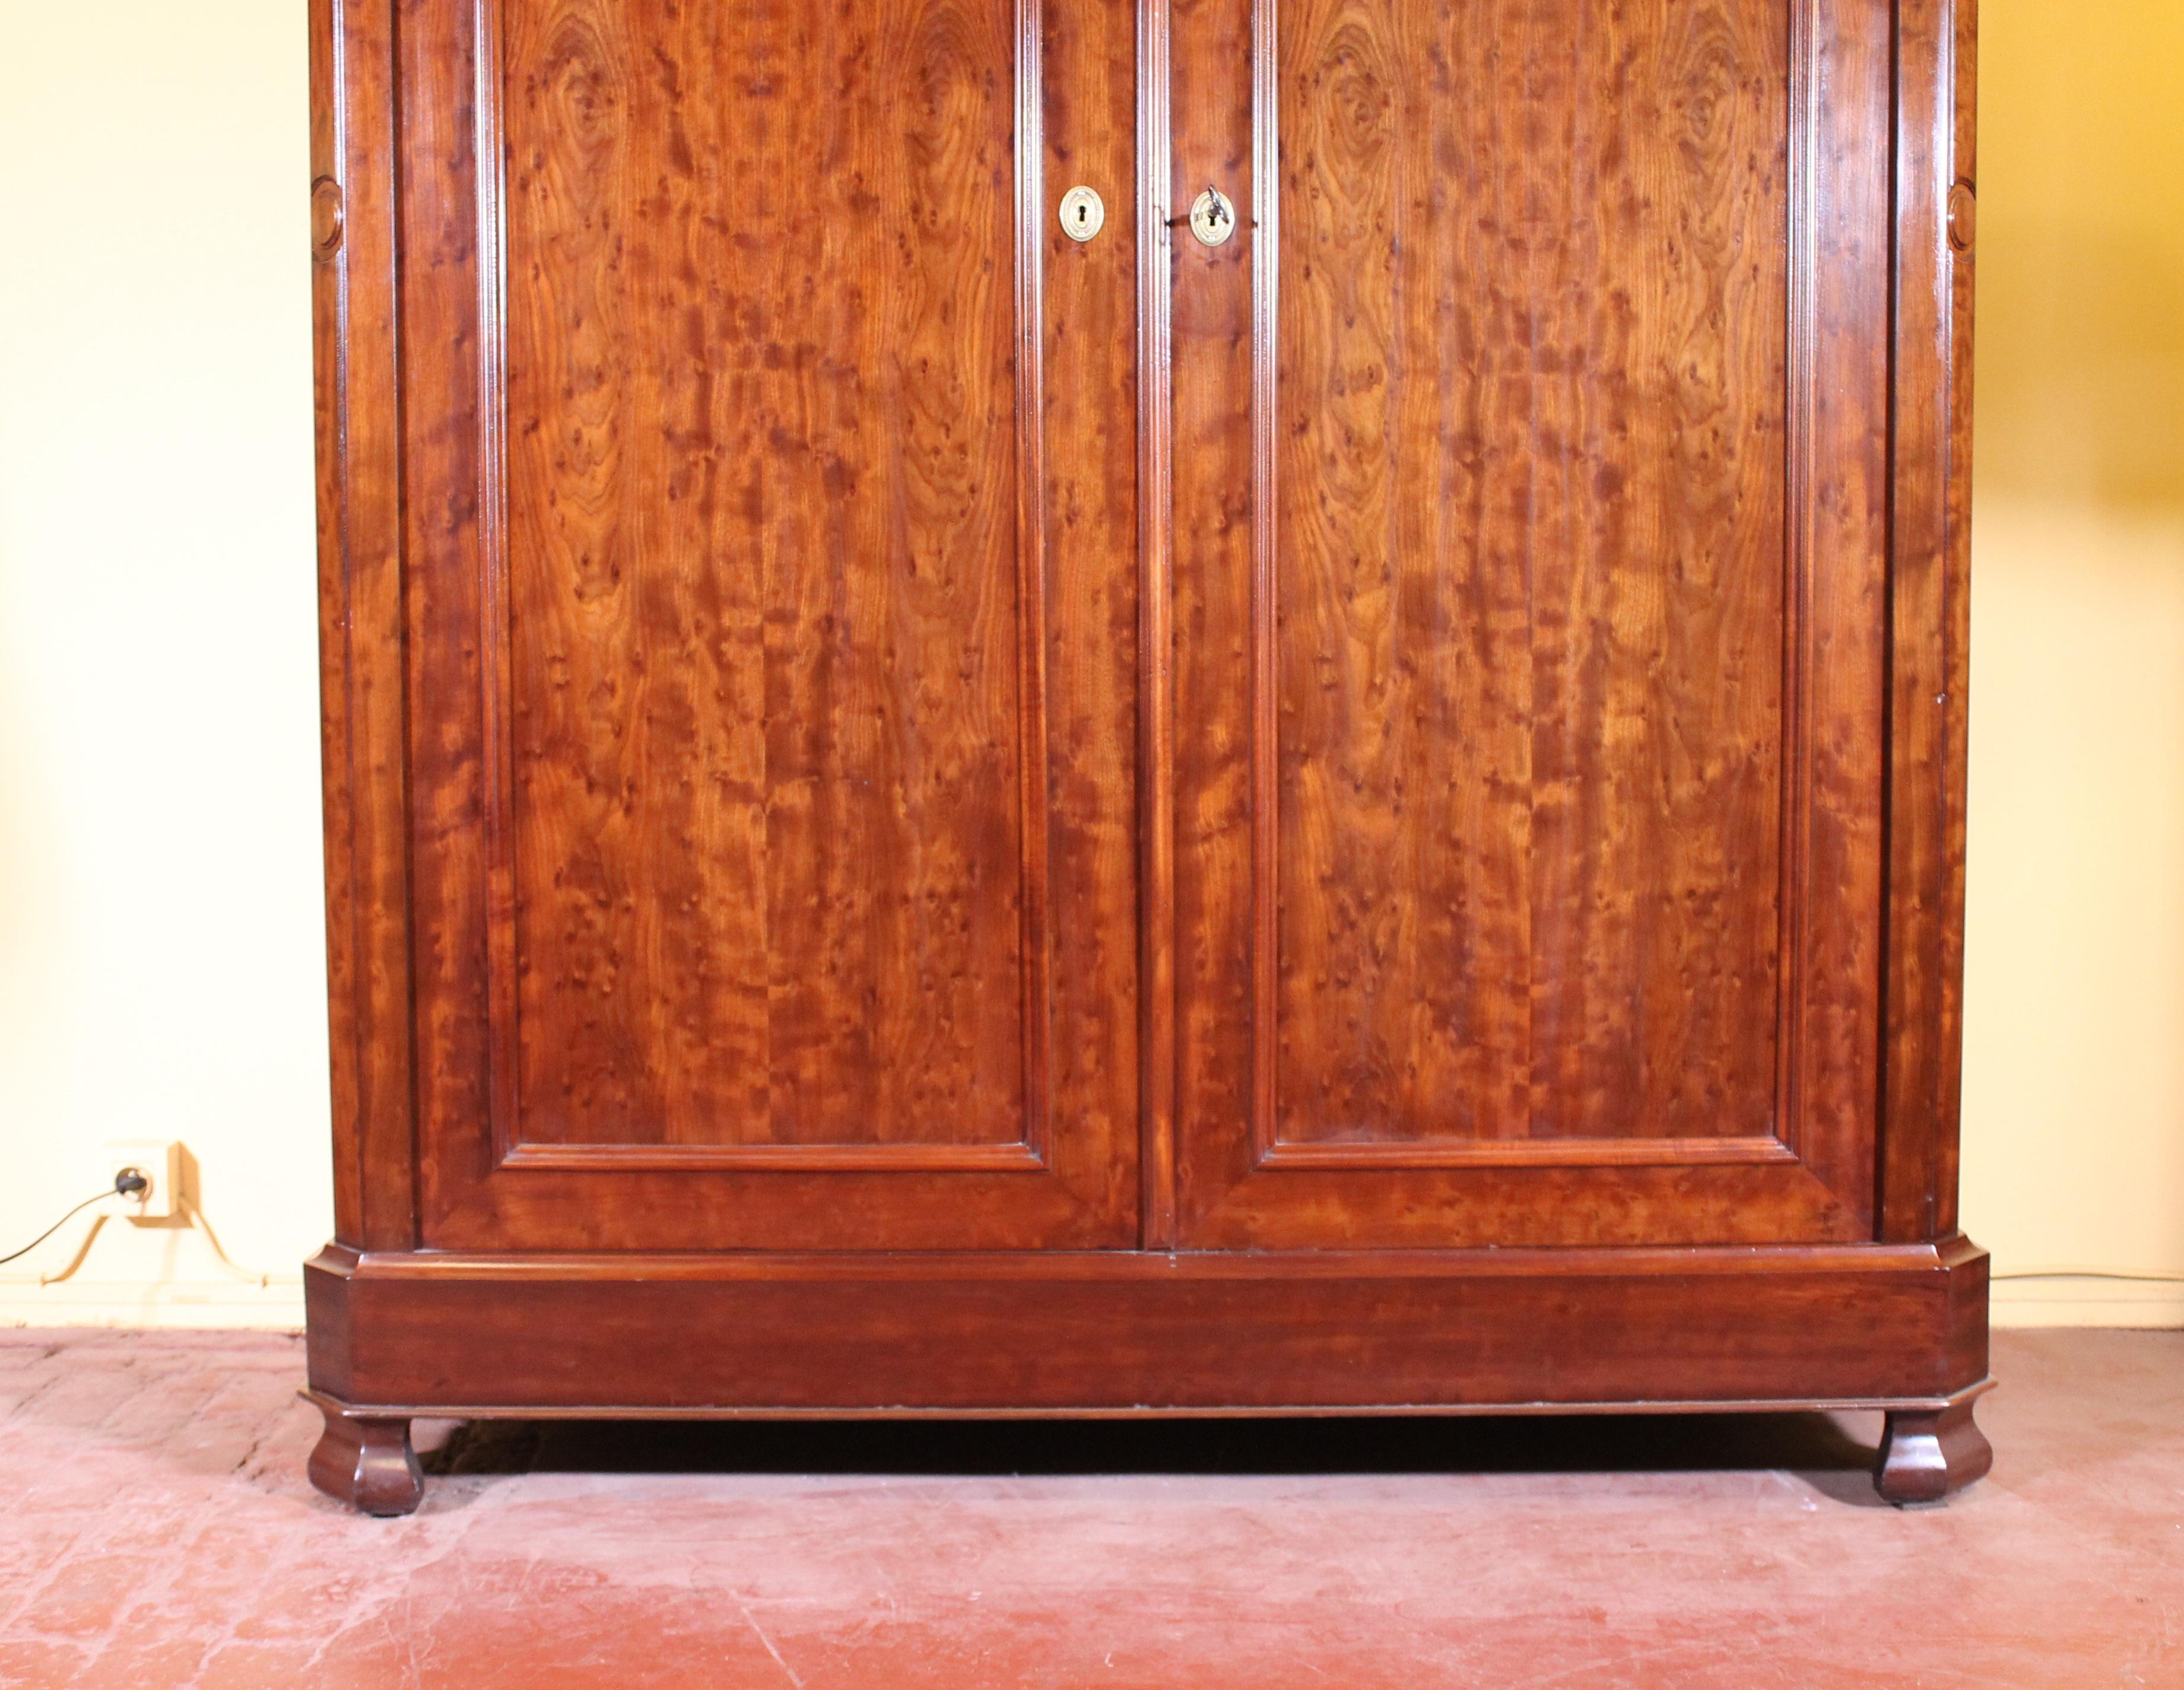 Magnificent 19th century wardrobe in mahogany, France

Very nice wardrobe with a beautiful flame and a mahogany of very good quality 

The wardrobe is currently install as a clothes hanger. But we can of course install shelves if